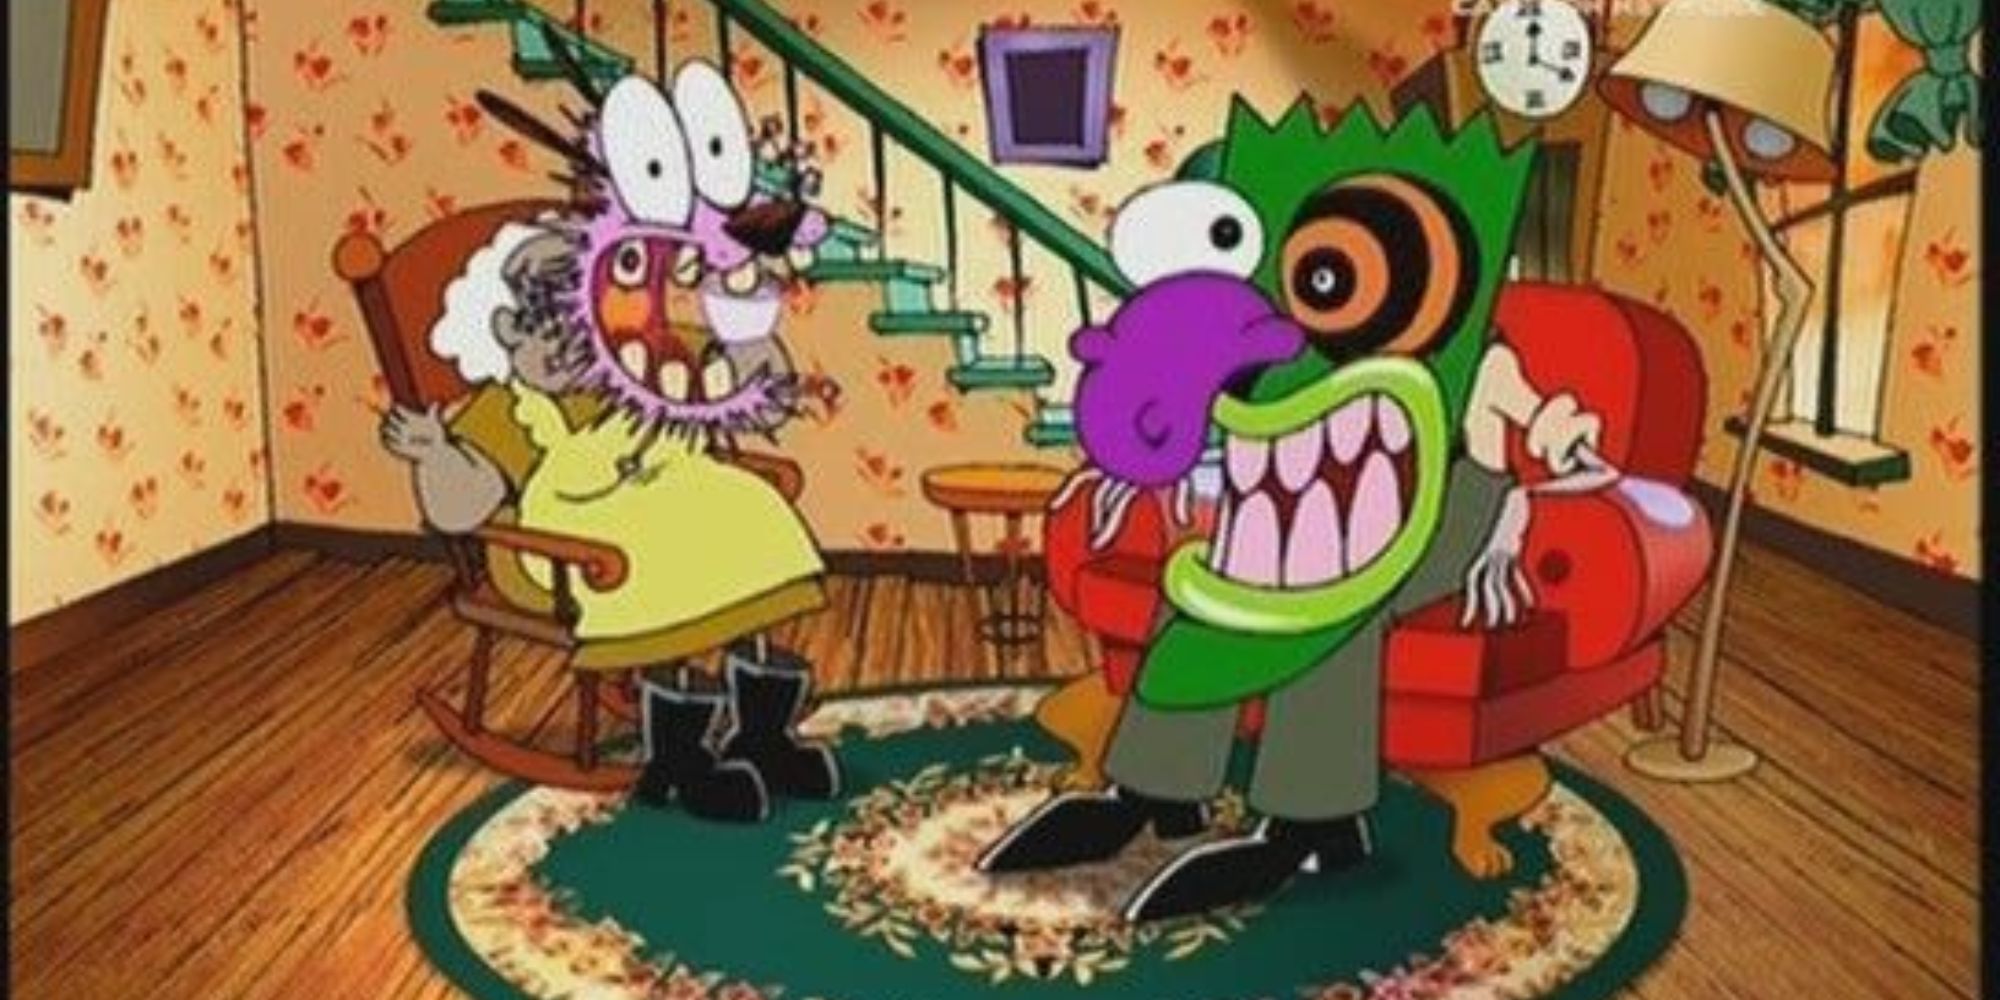 Courage the Cowardly Dog (1999 - 2002)